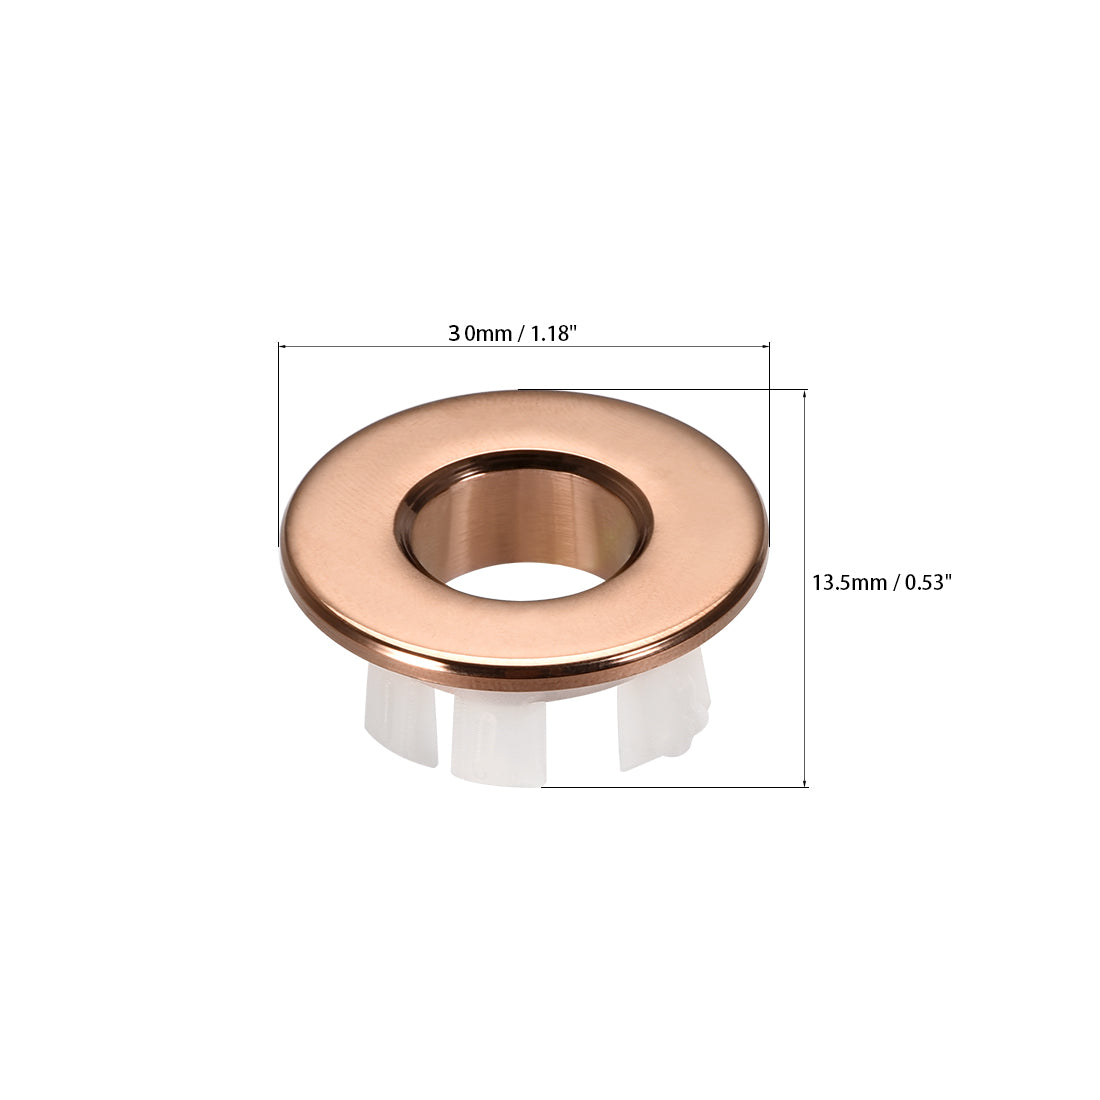 uxcell Uxcell Sink Basin Trim Overflow Cover Copper Insert in Hole Round Caps 3Pcs